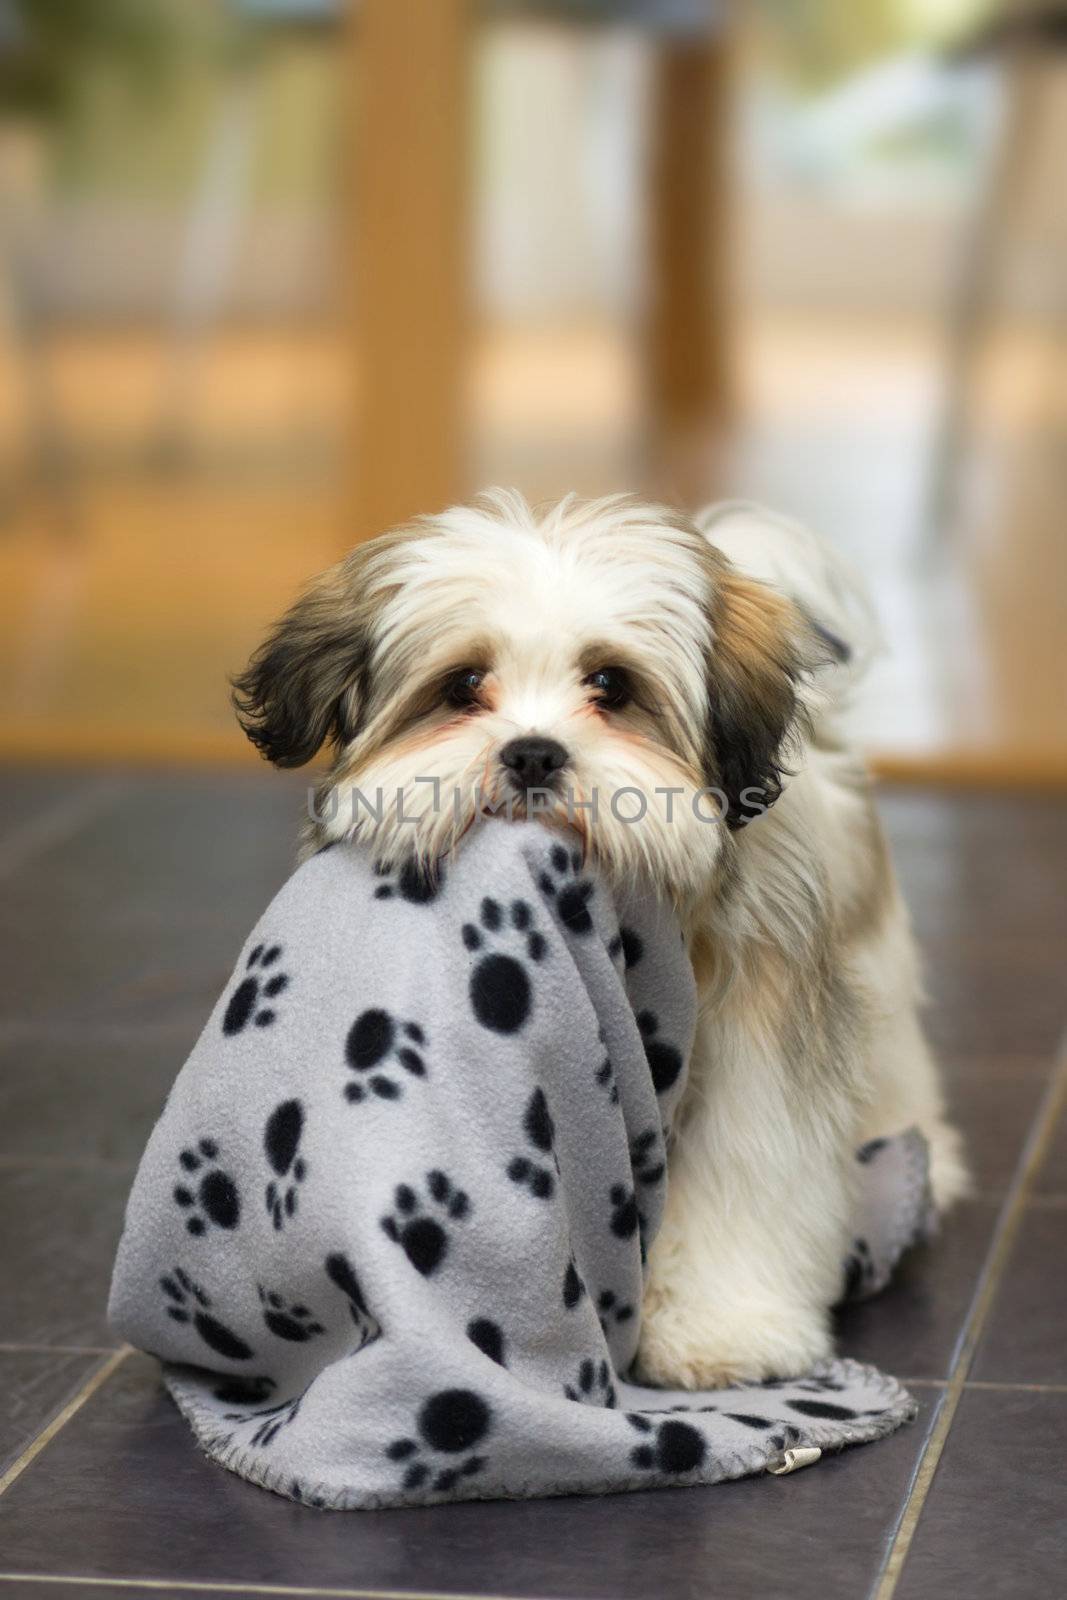 Cute lhasa apso puppy plays with its blanket